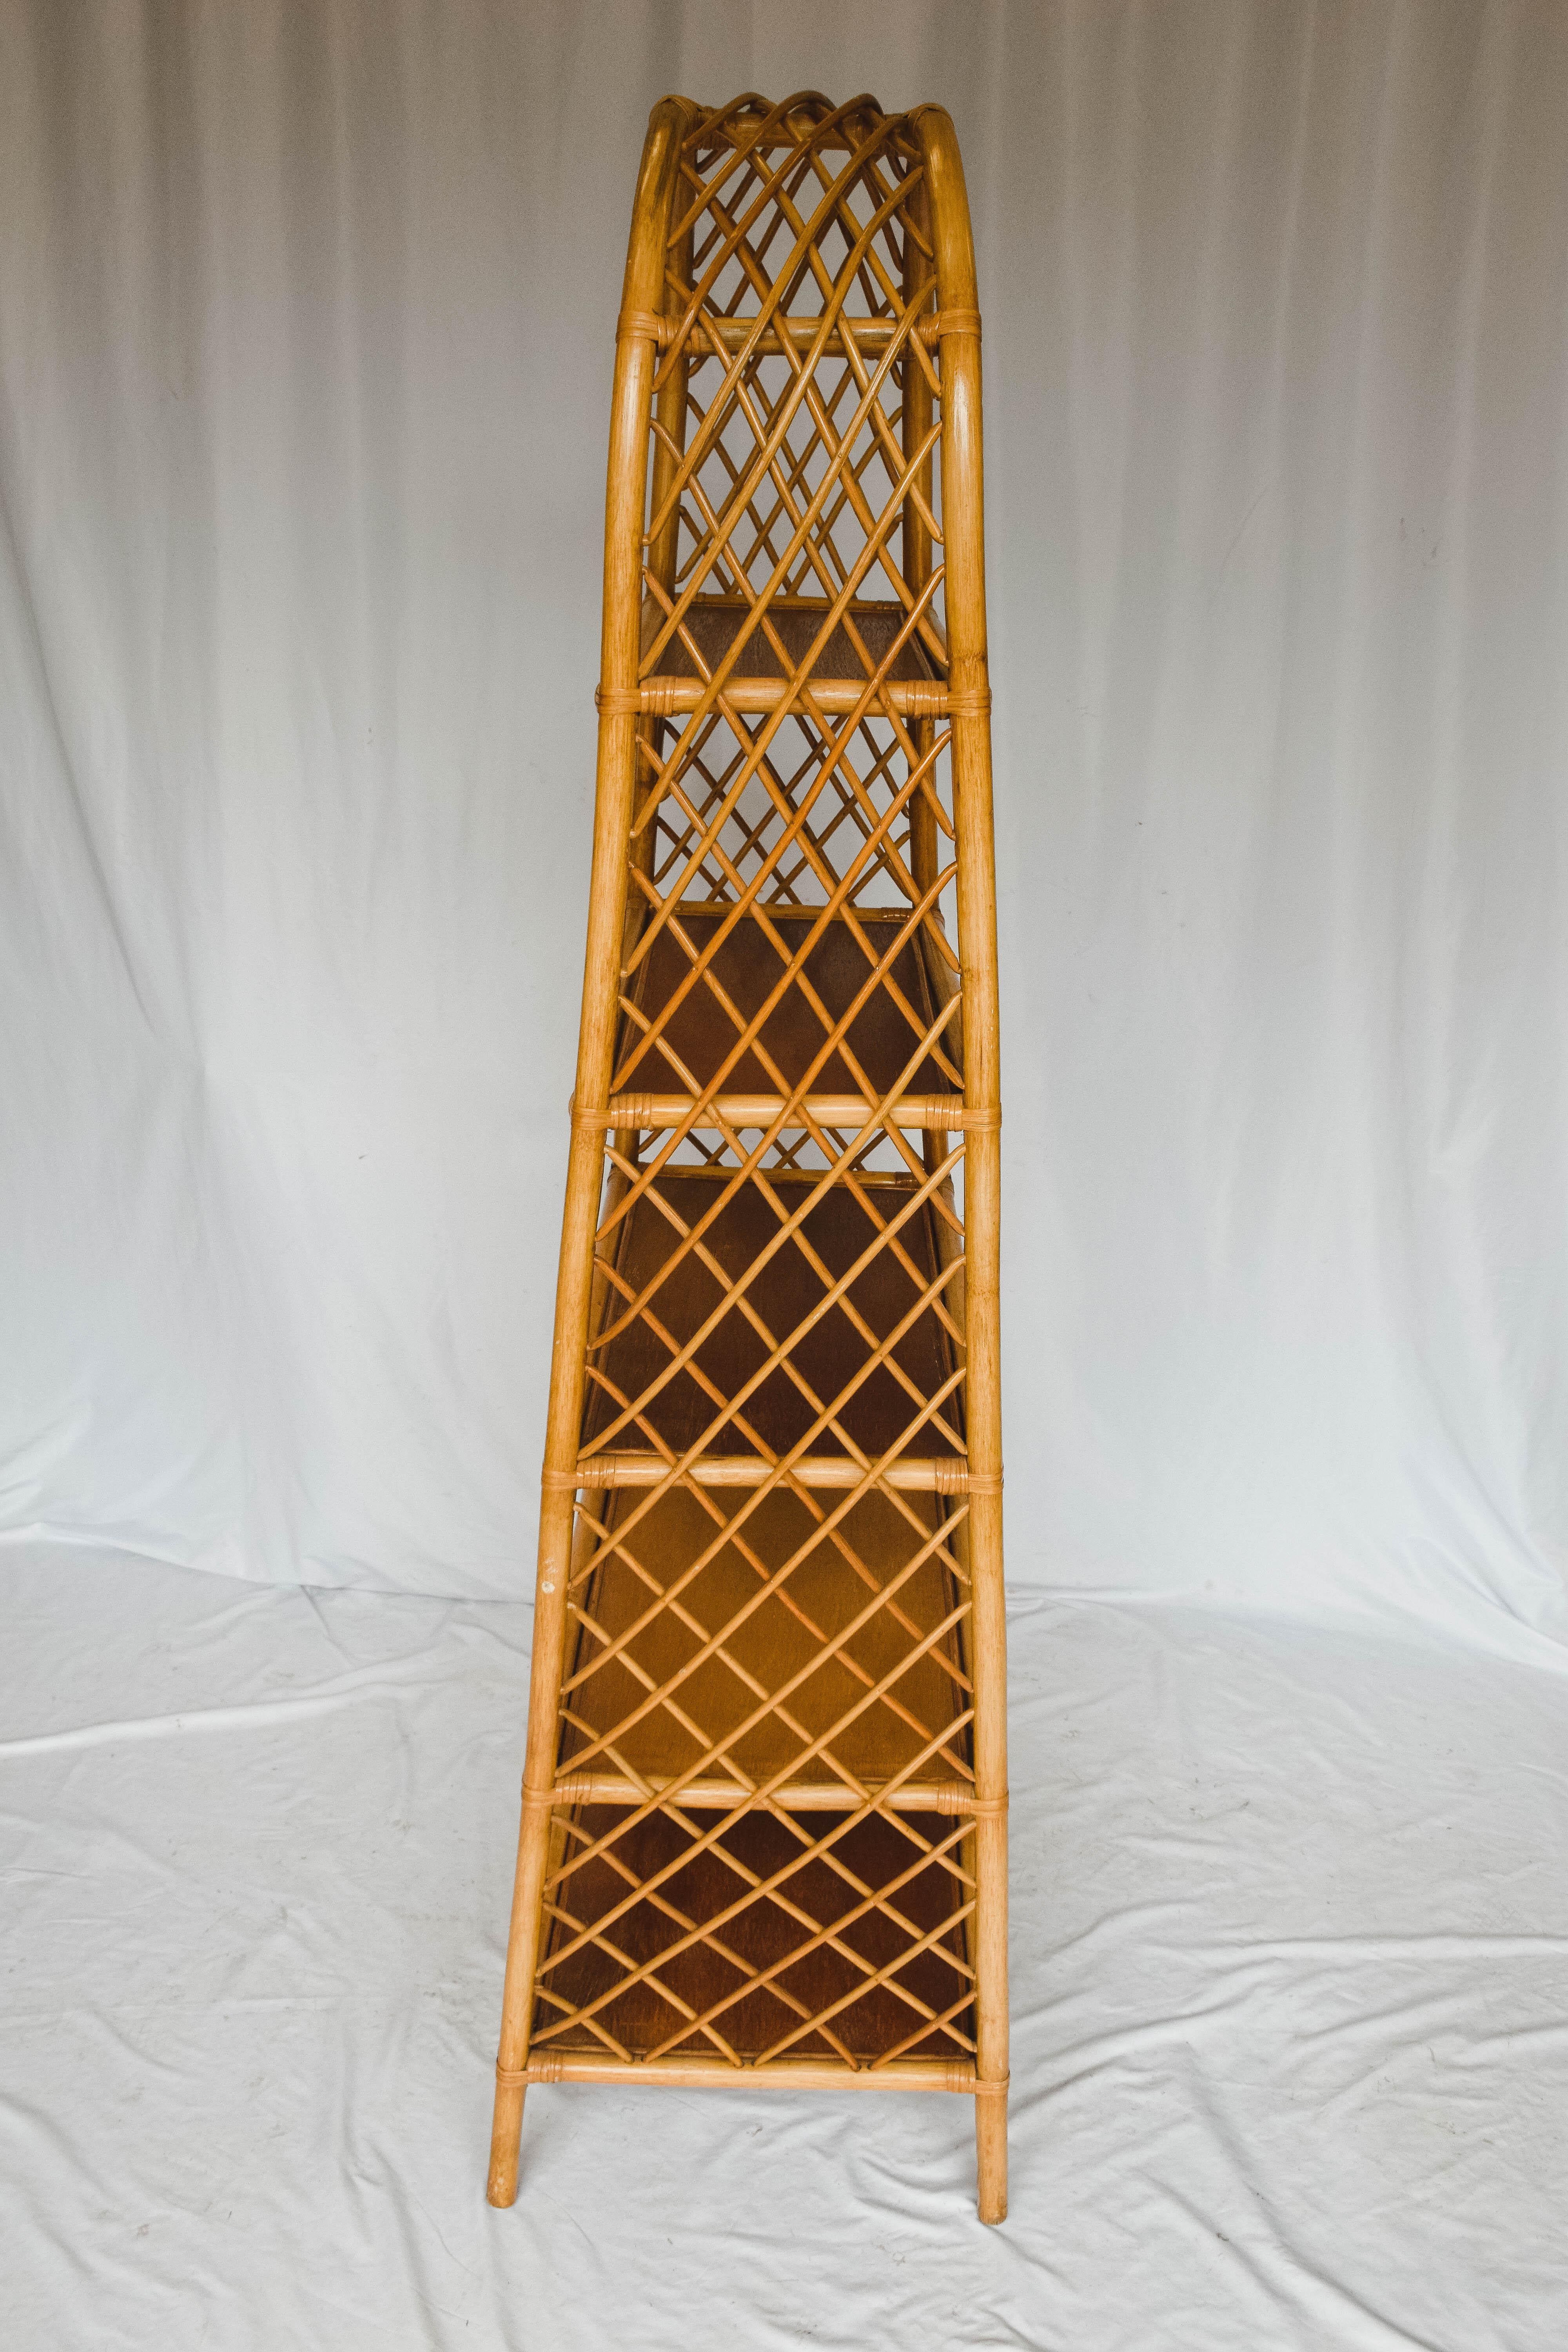 This 5 shelf midcentury rattan étagère features a lattice work detail around the sides and tapers up to a rounded top. This piece would make a statement in a bath or reading nook.